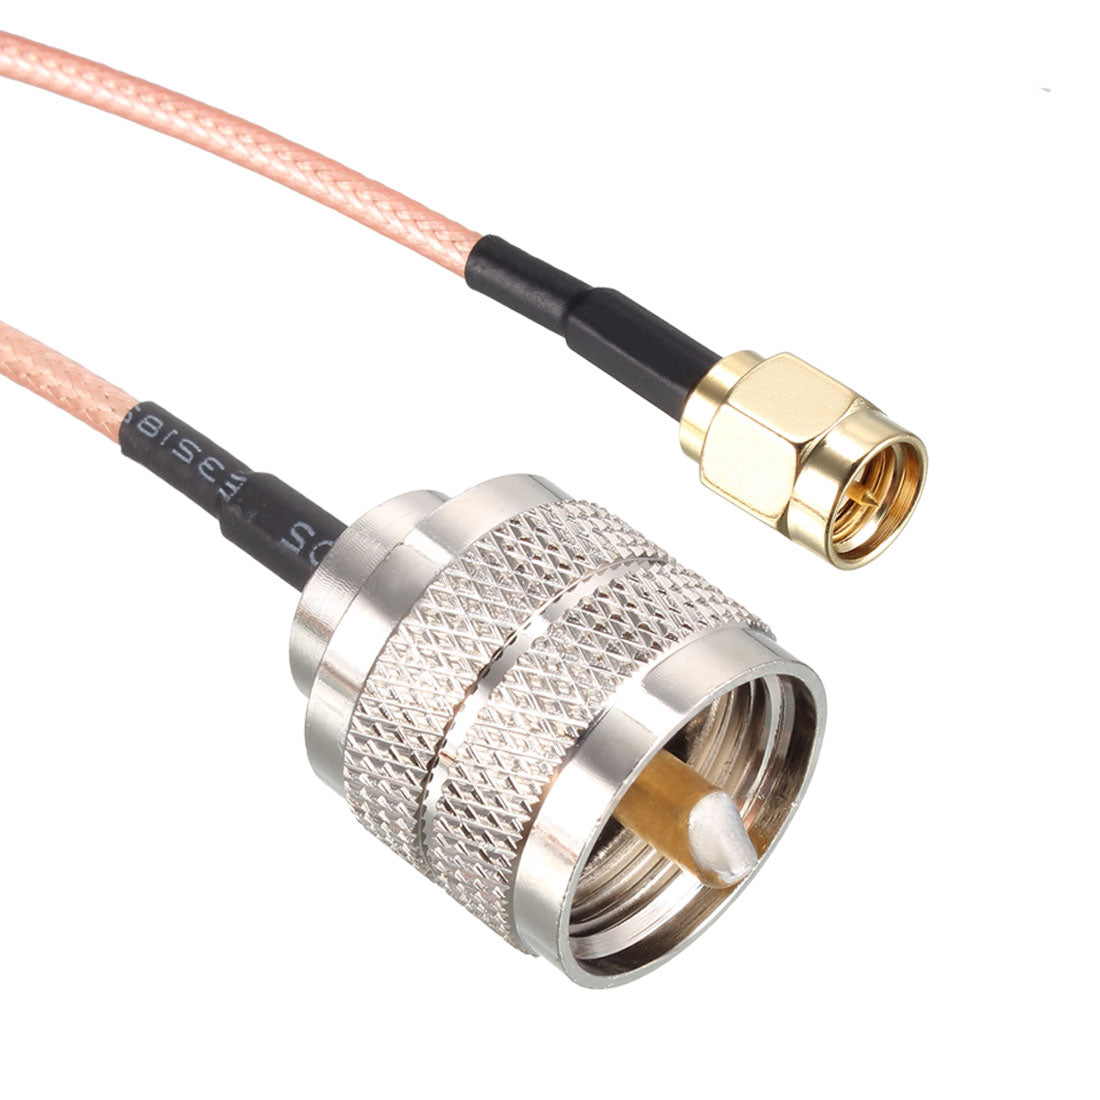 uxcell Uxcell SMA Male to UHF PL-259 Male RG316 RF Coaxial Coax Cable